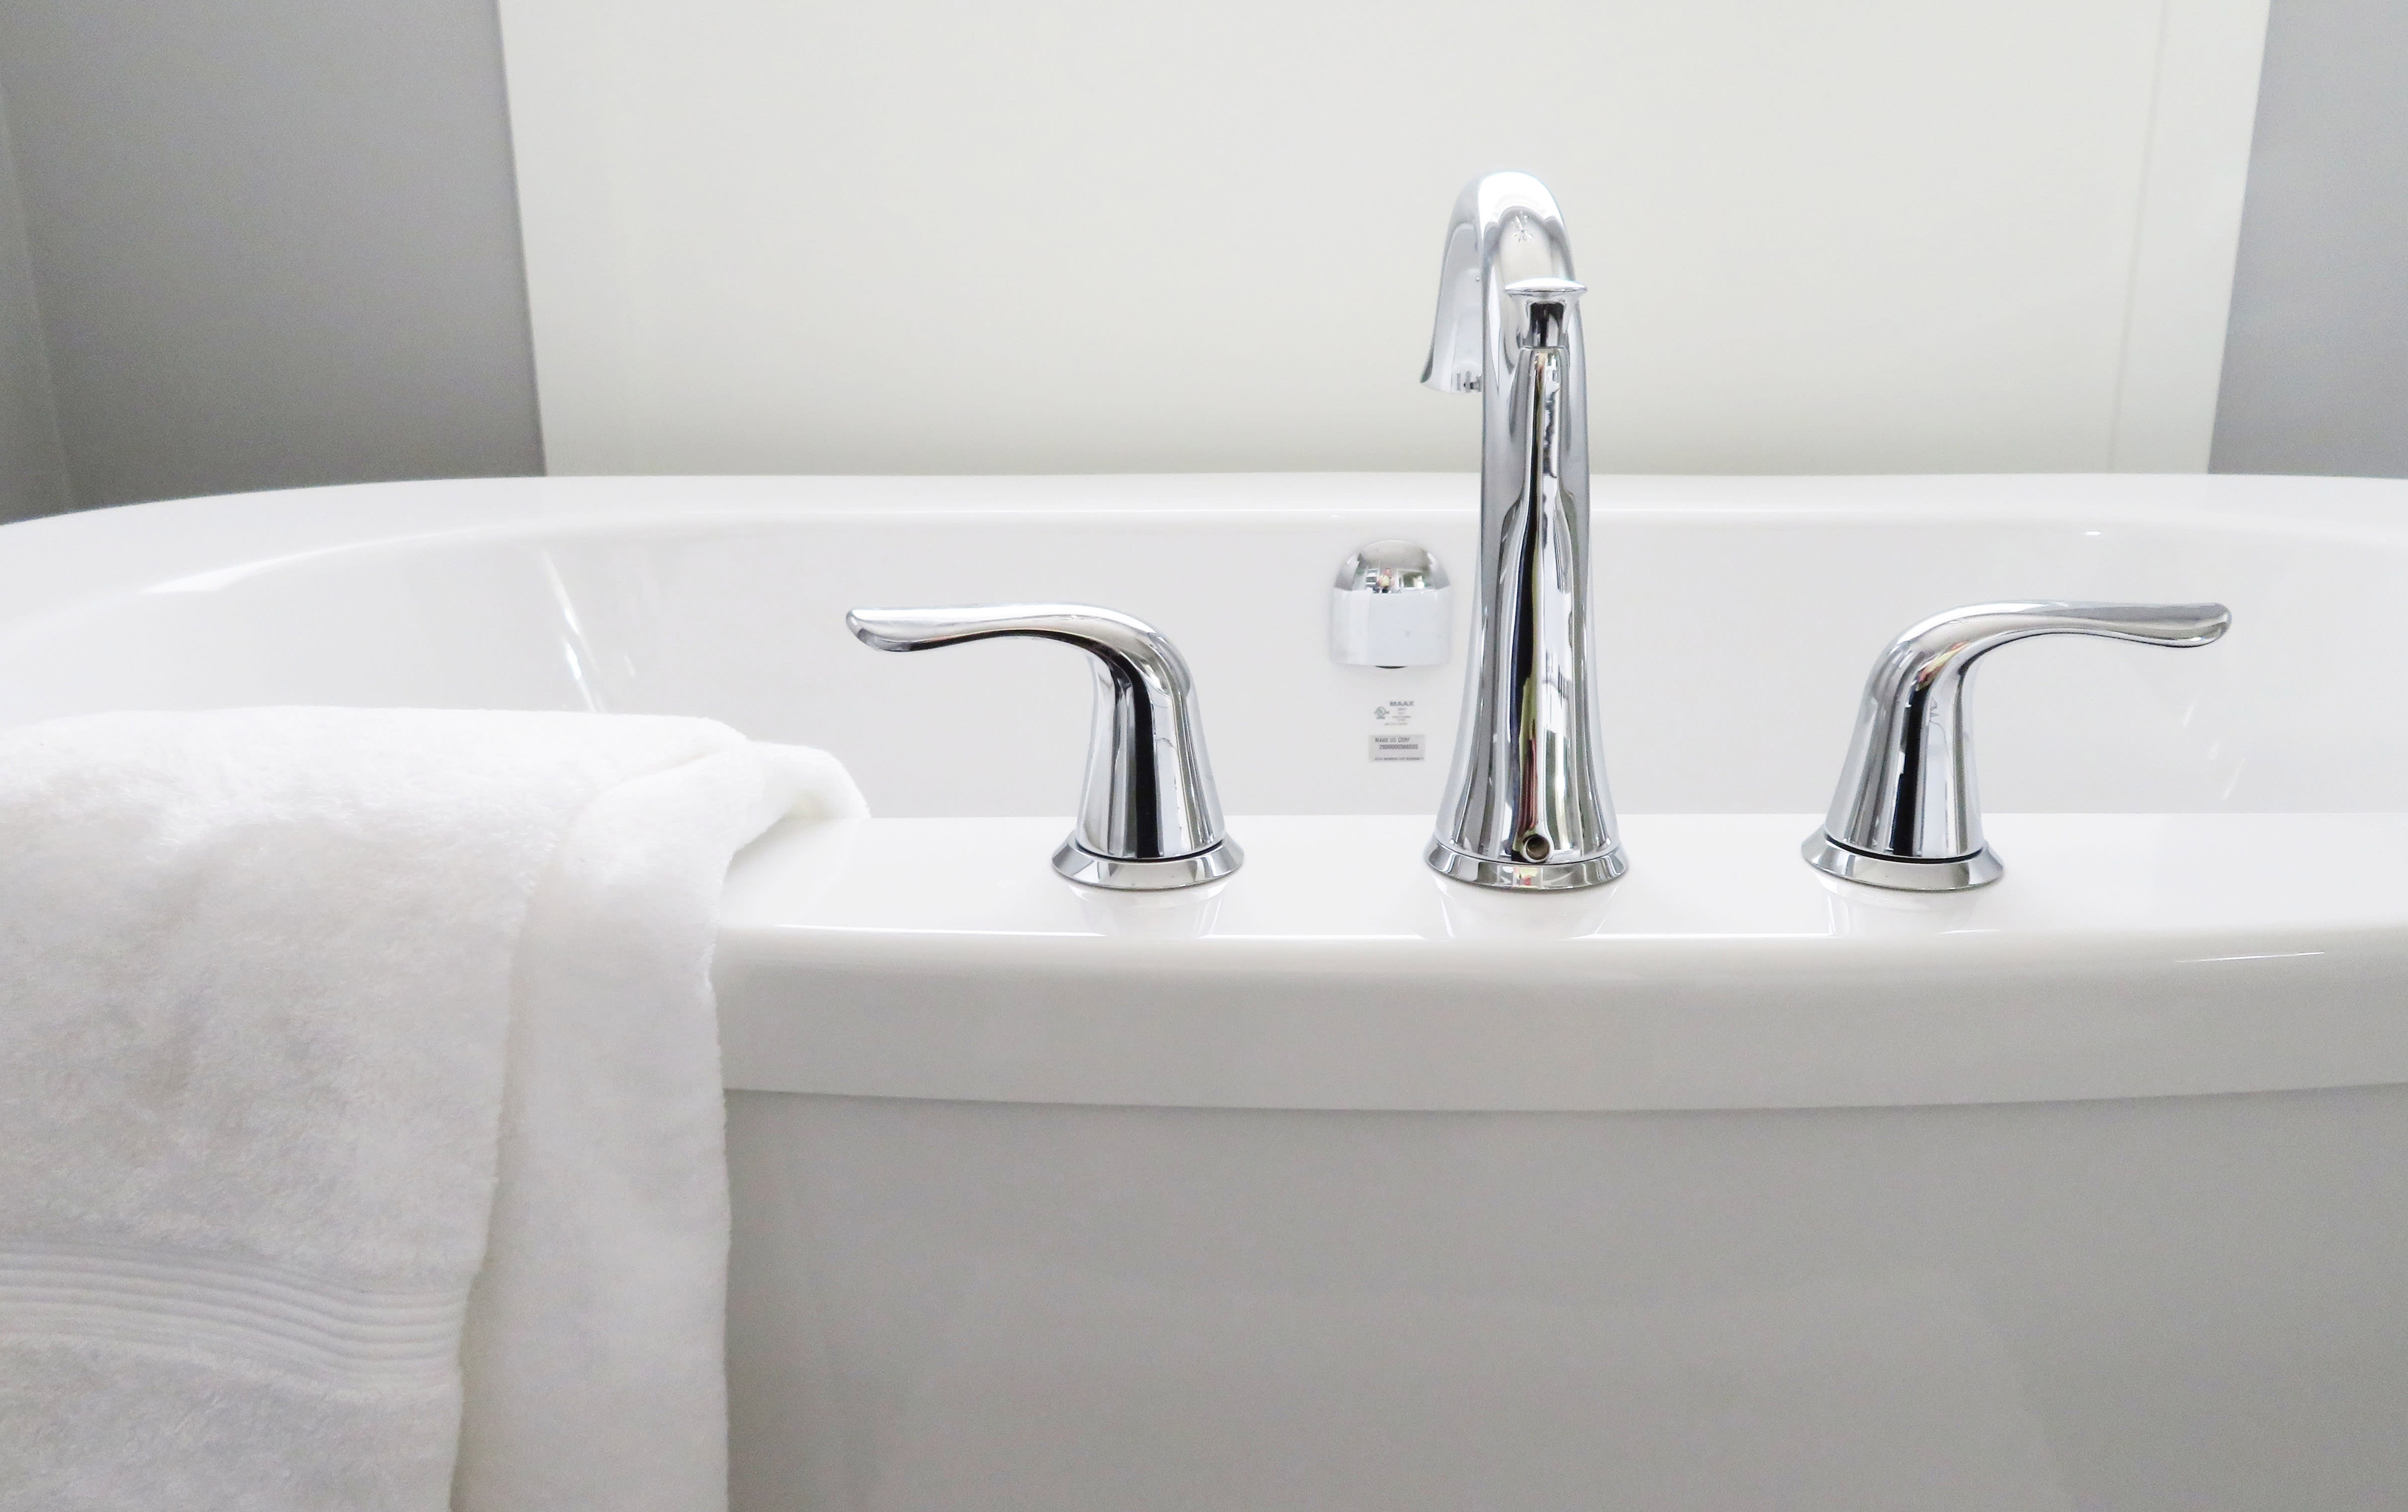 5 Ways To Clean An Old Porcelain Tub, How To Clean Black Marks In Bathtub